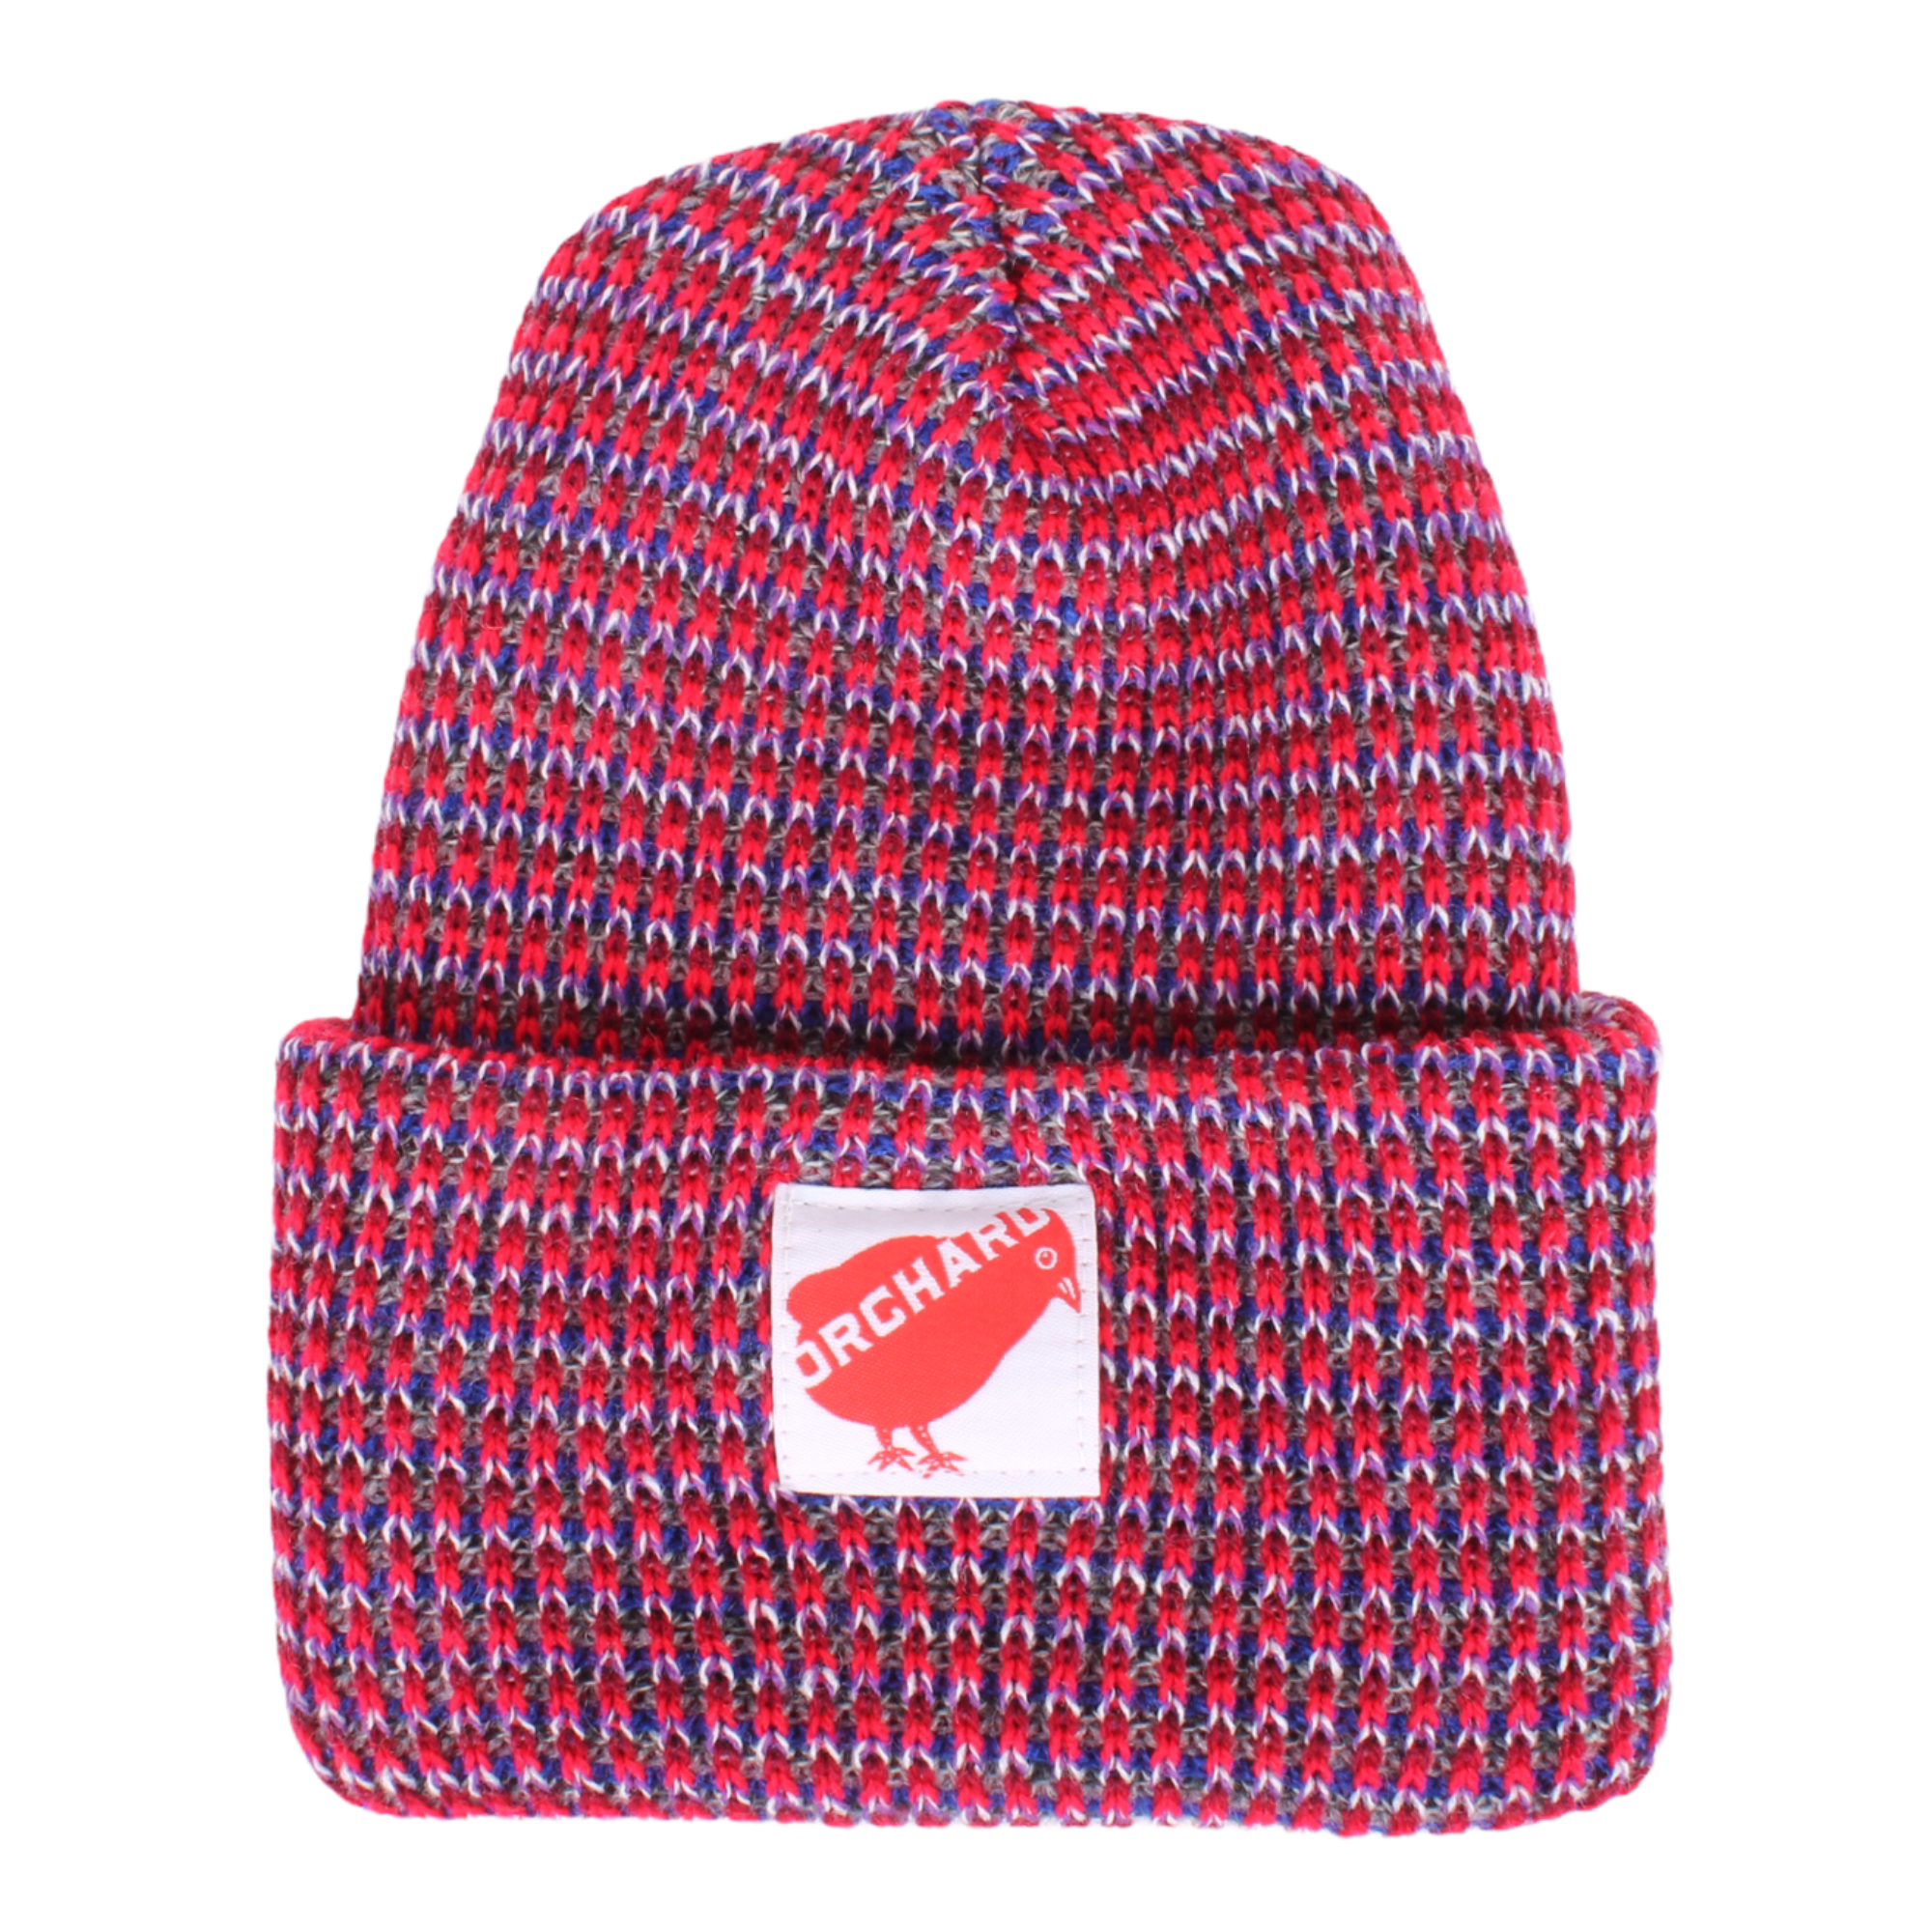 Orchard Red Bird Watch Cap Multi Color Red/Blue/Grey